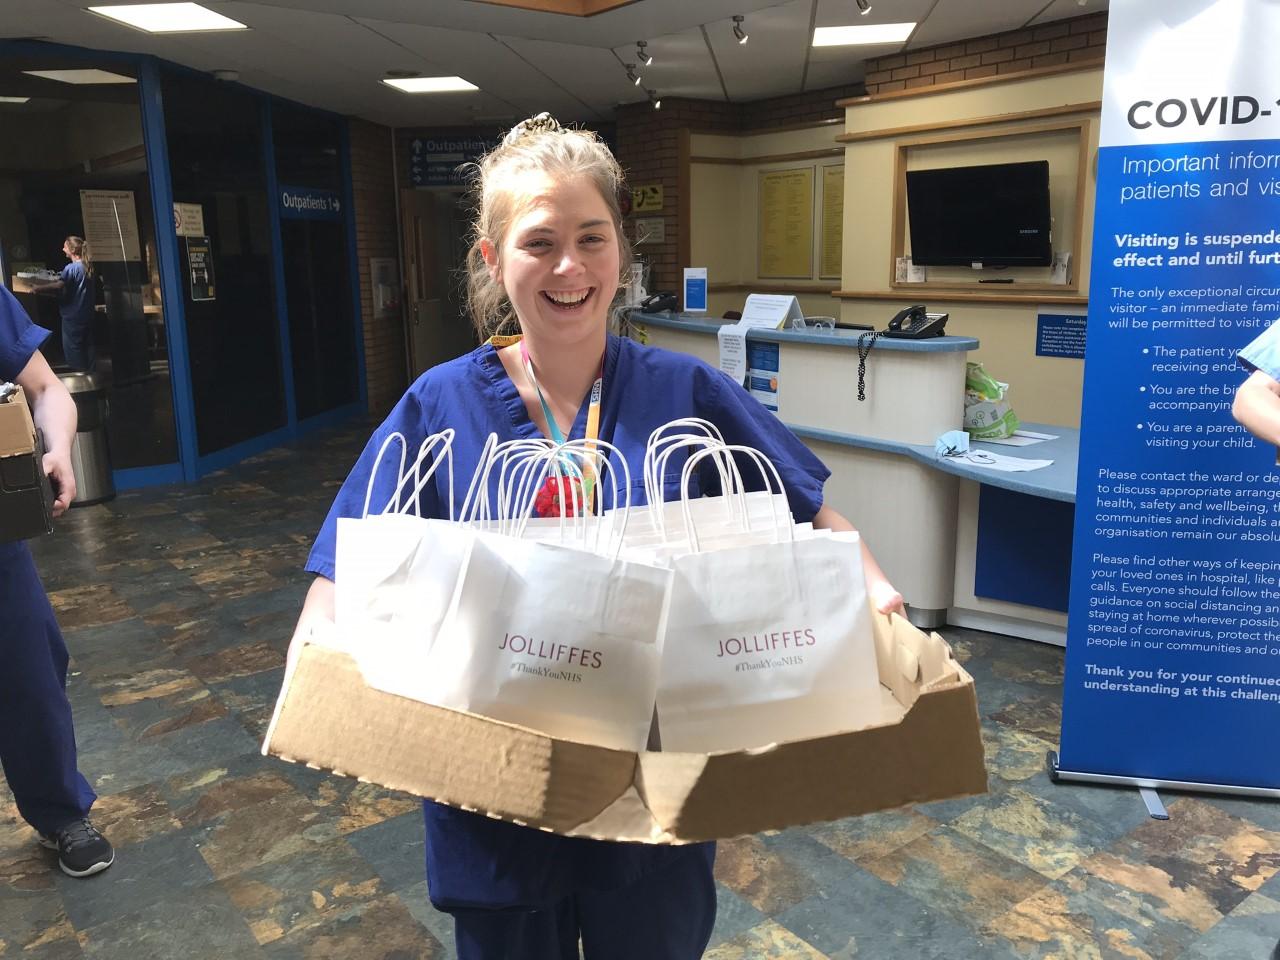 THE CHESTER STANDARD: CHESTER LAW FIRM PROVIDES LUNCH FOR HOSPITAL WARD STAFF